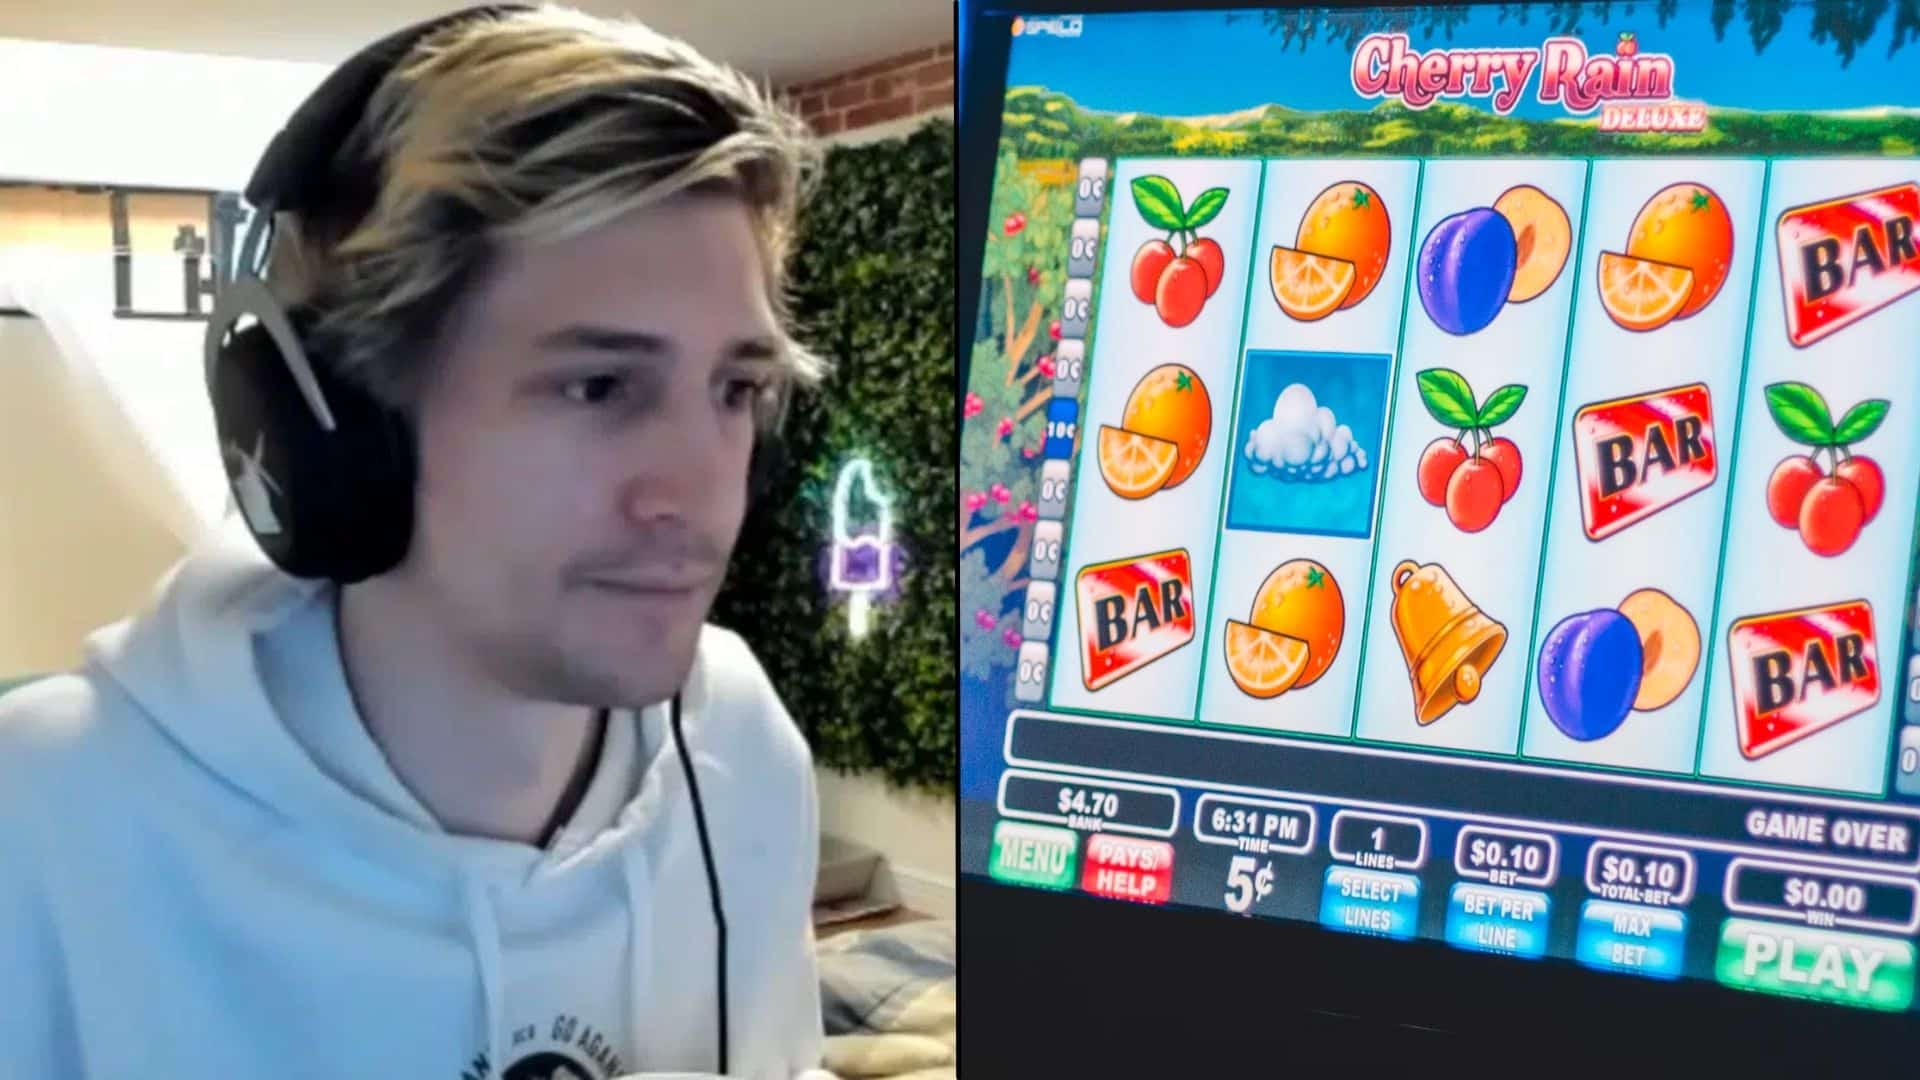 xQc looking at camera side-by-side with slot machine